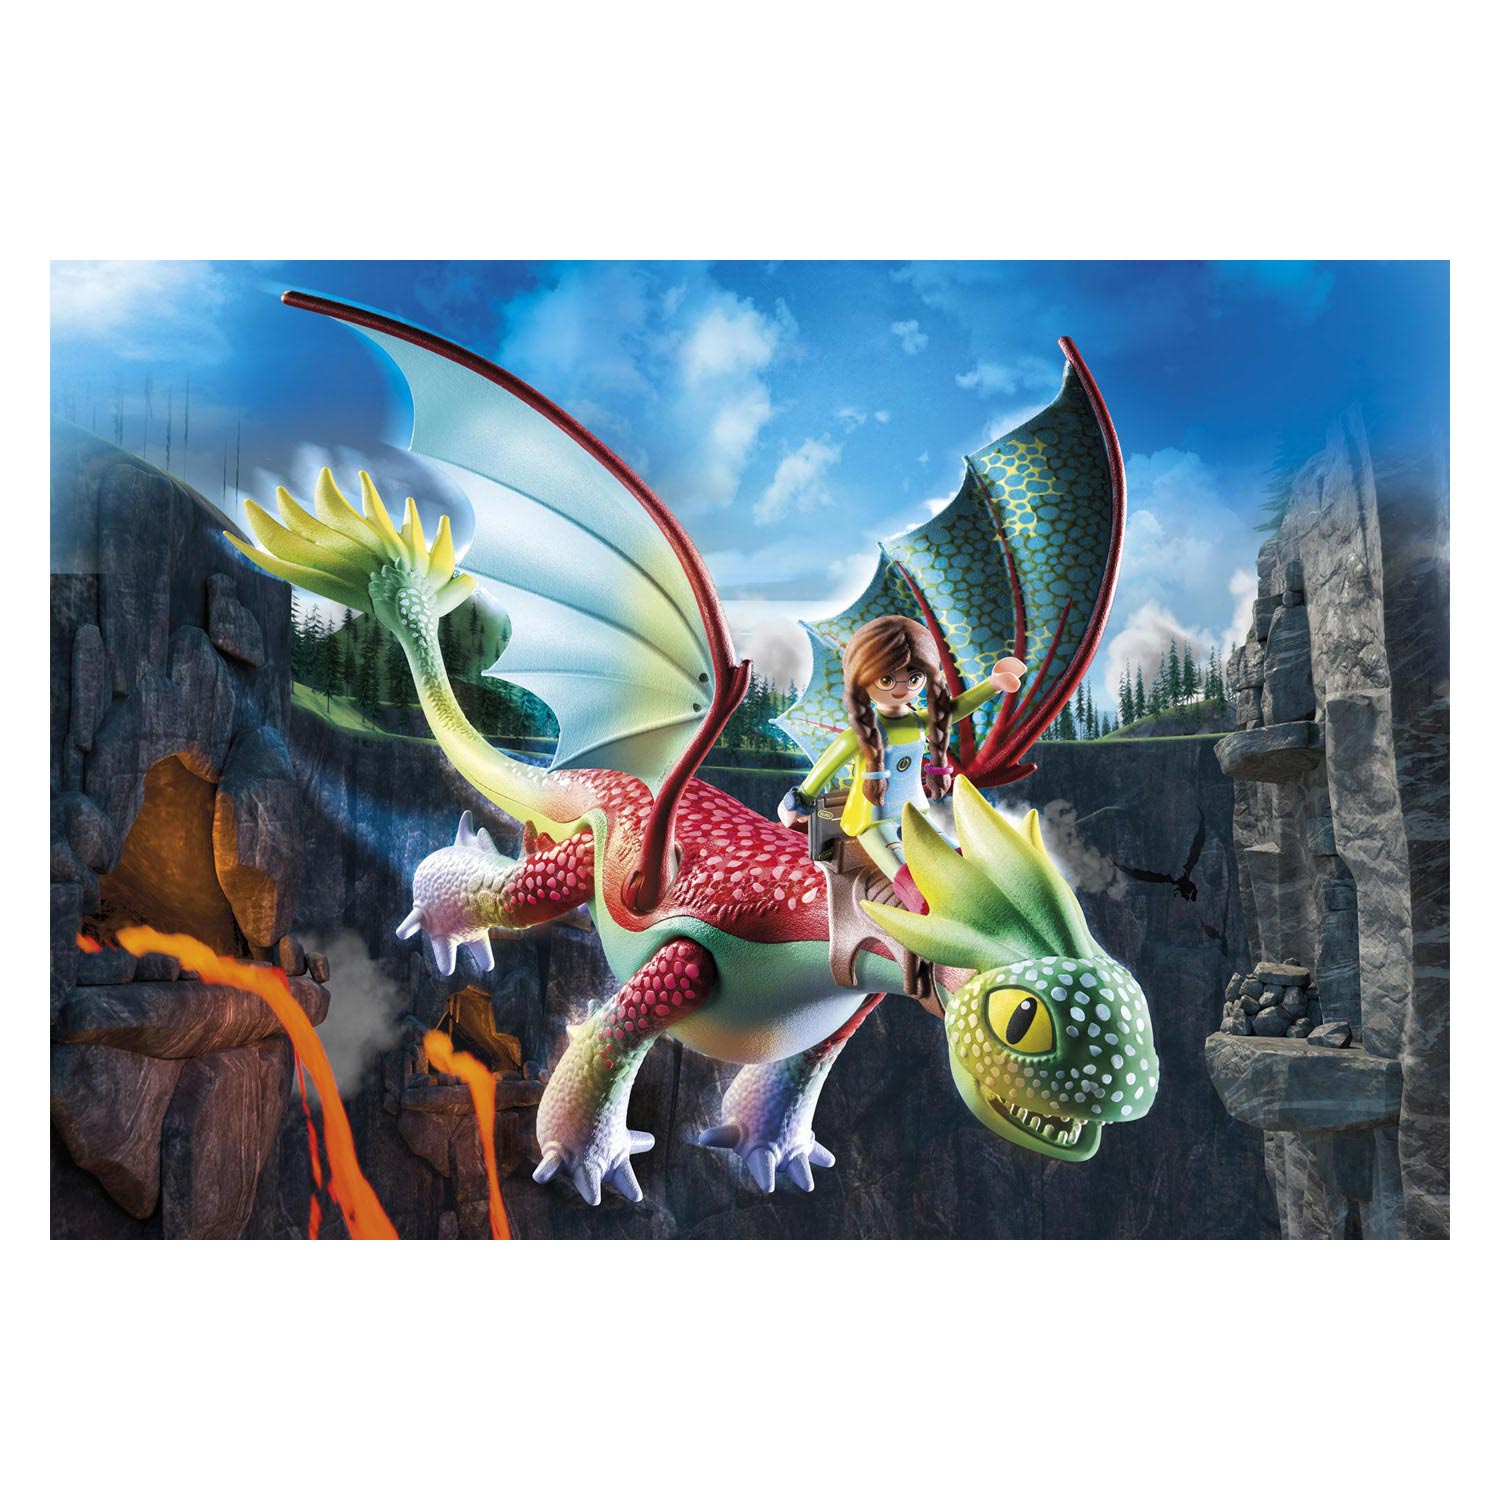 Playmobil Dragons: The Nine Realms Feathers & Alex - 71083